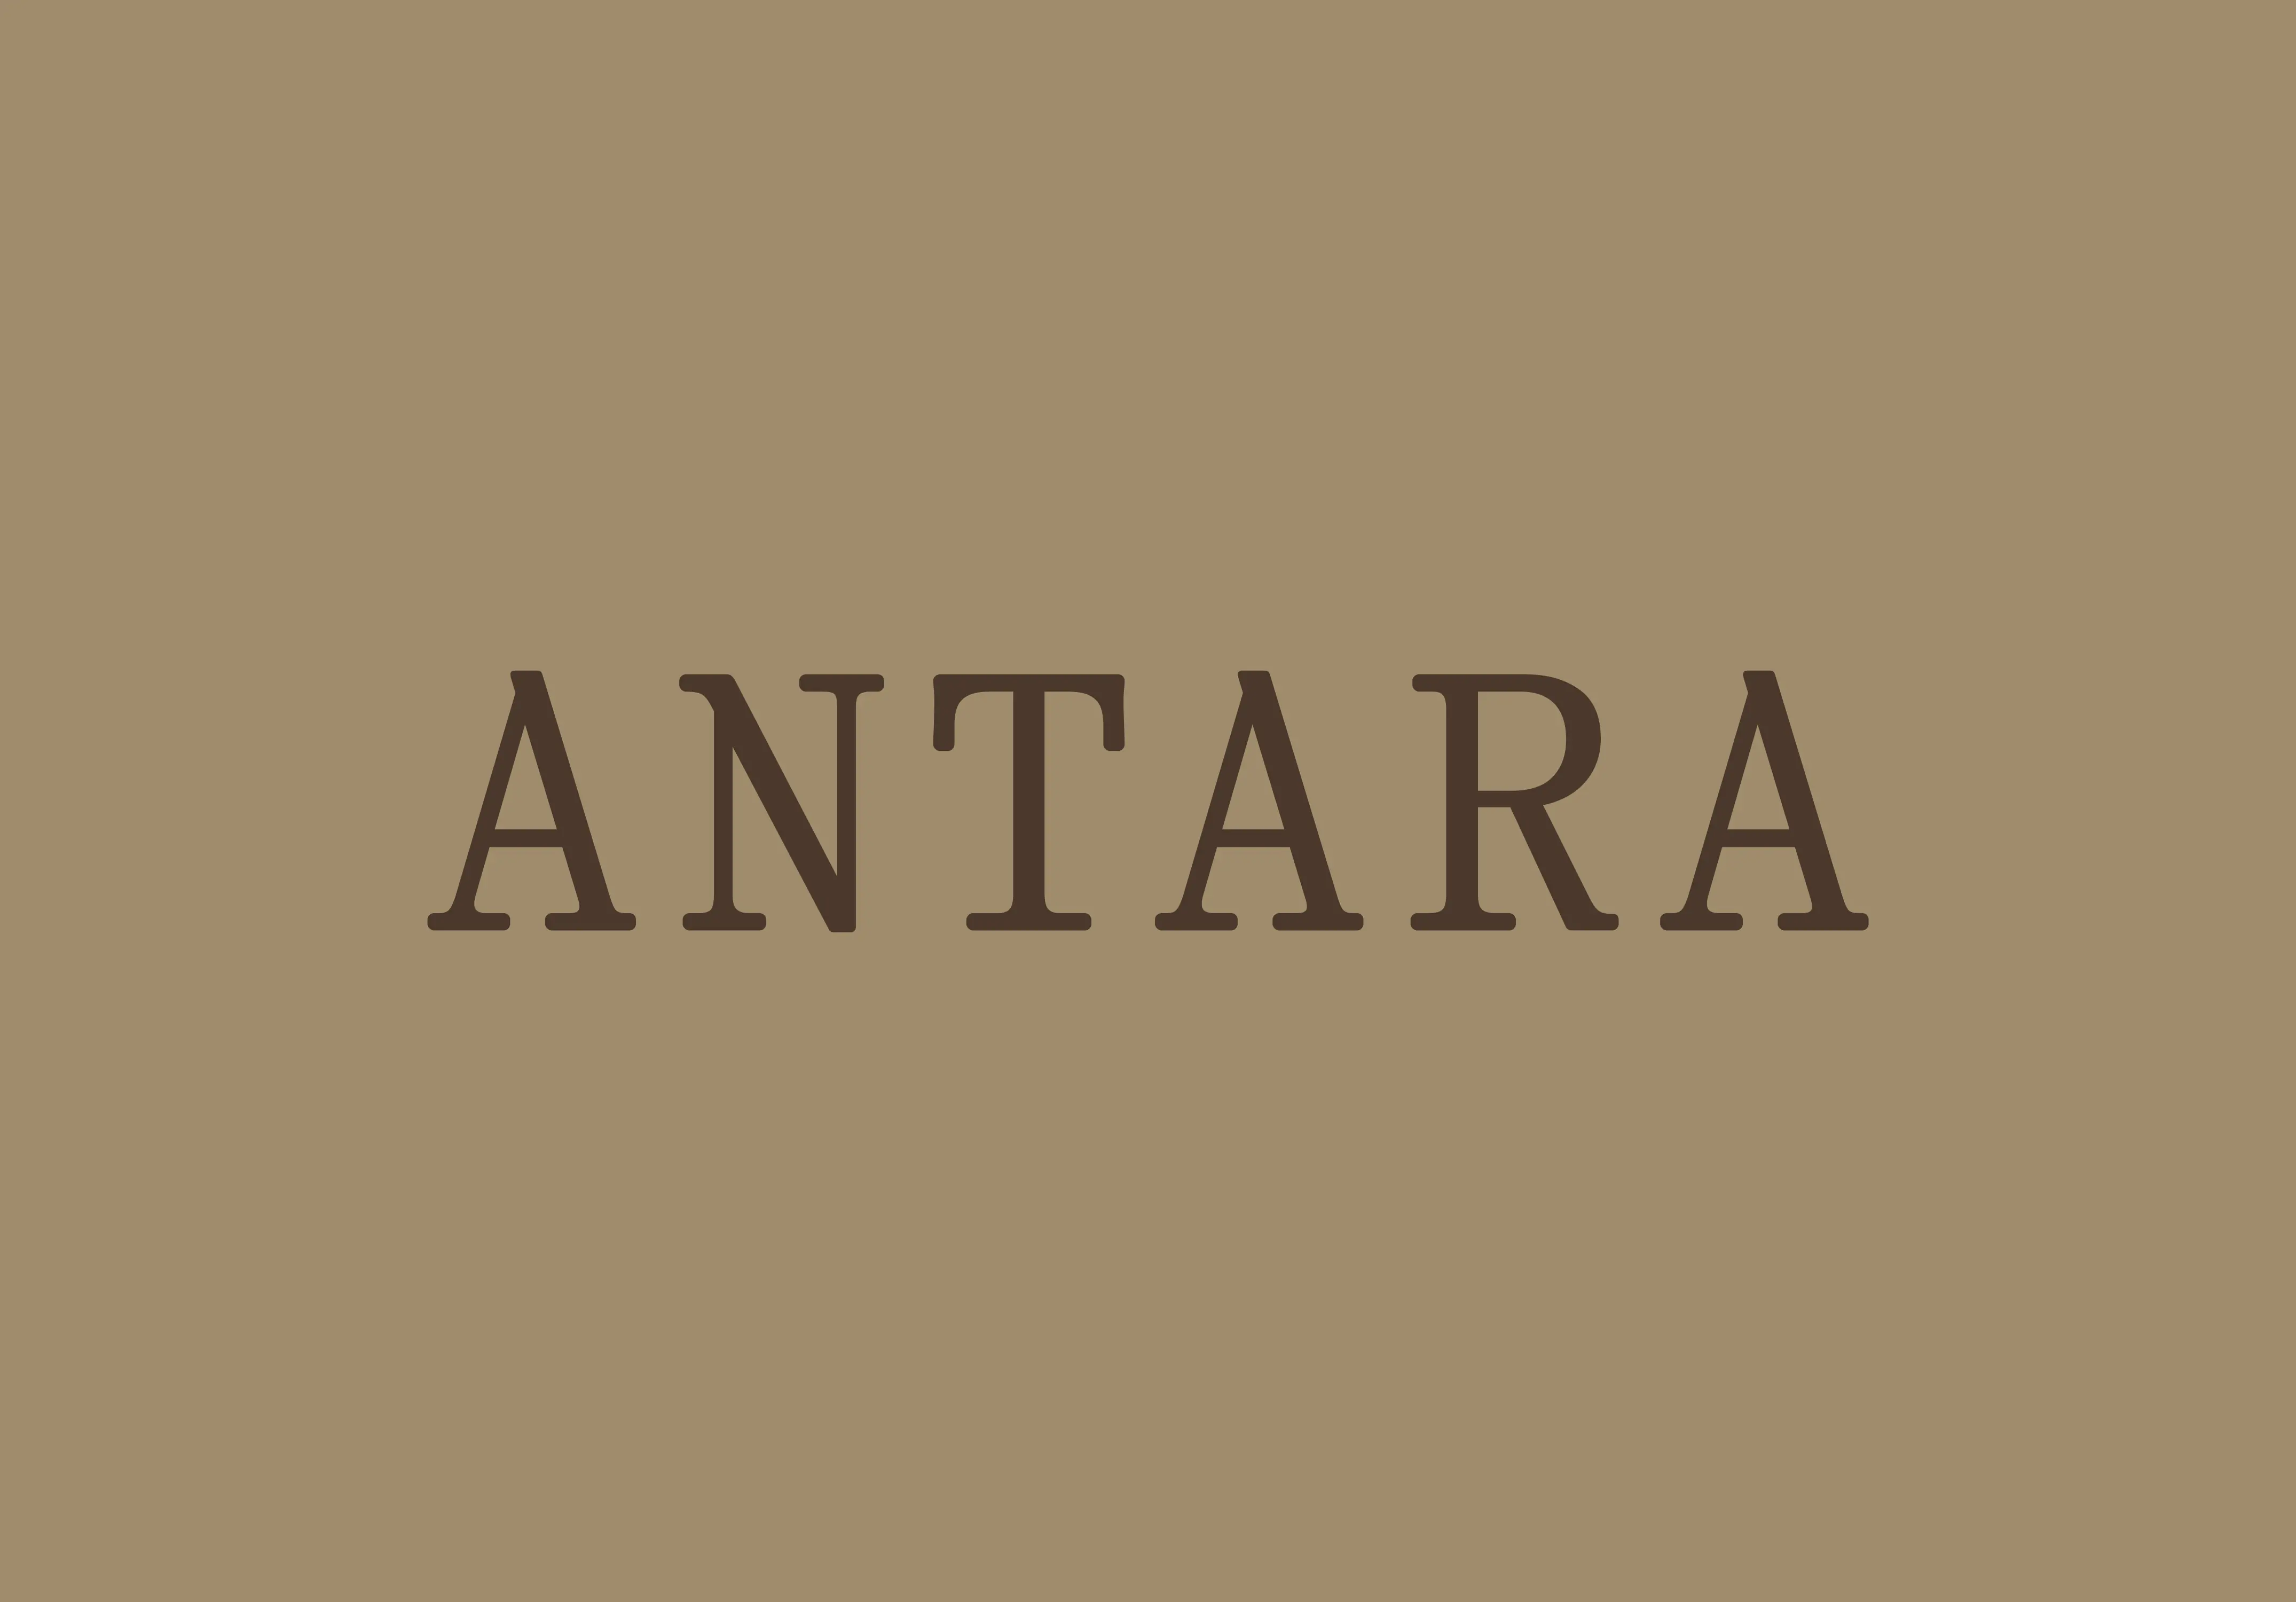 New logo, logotype, website, menu and business card design for Melbourne restaurant and bakery Antara 128 designed by Mucho